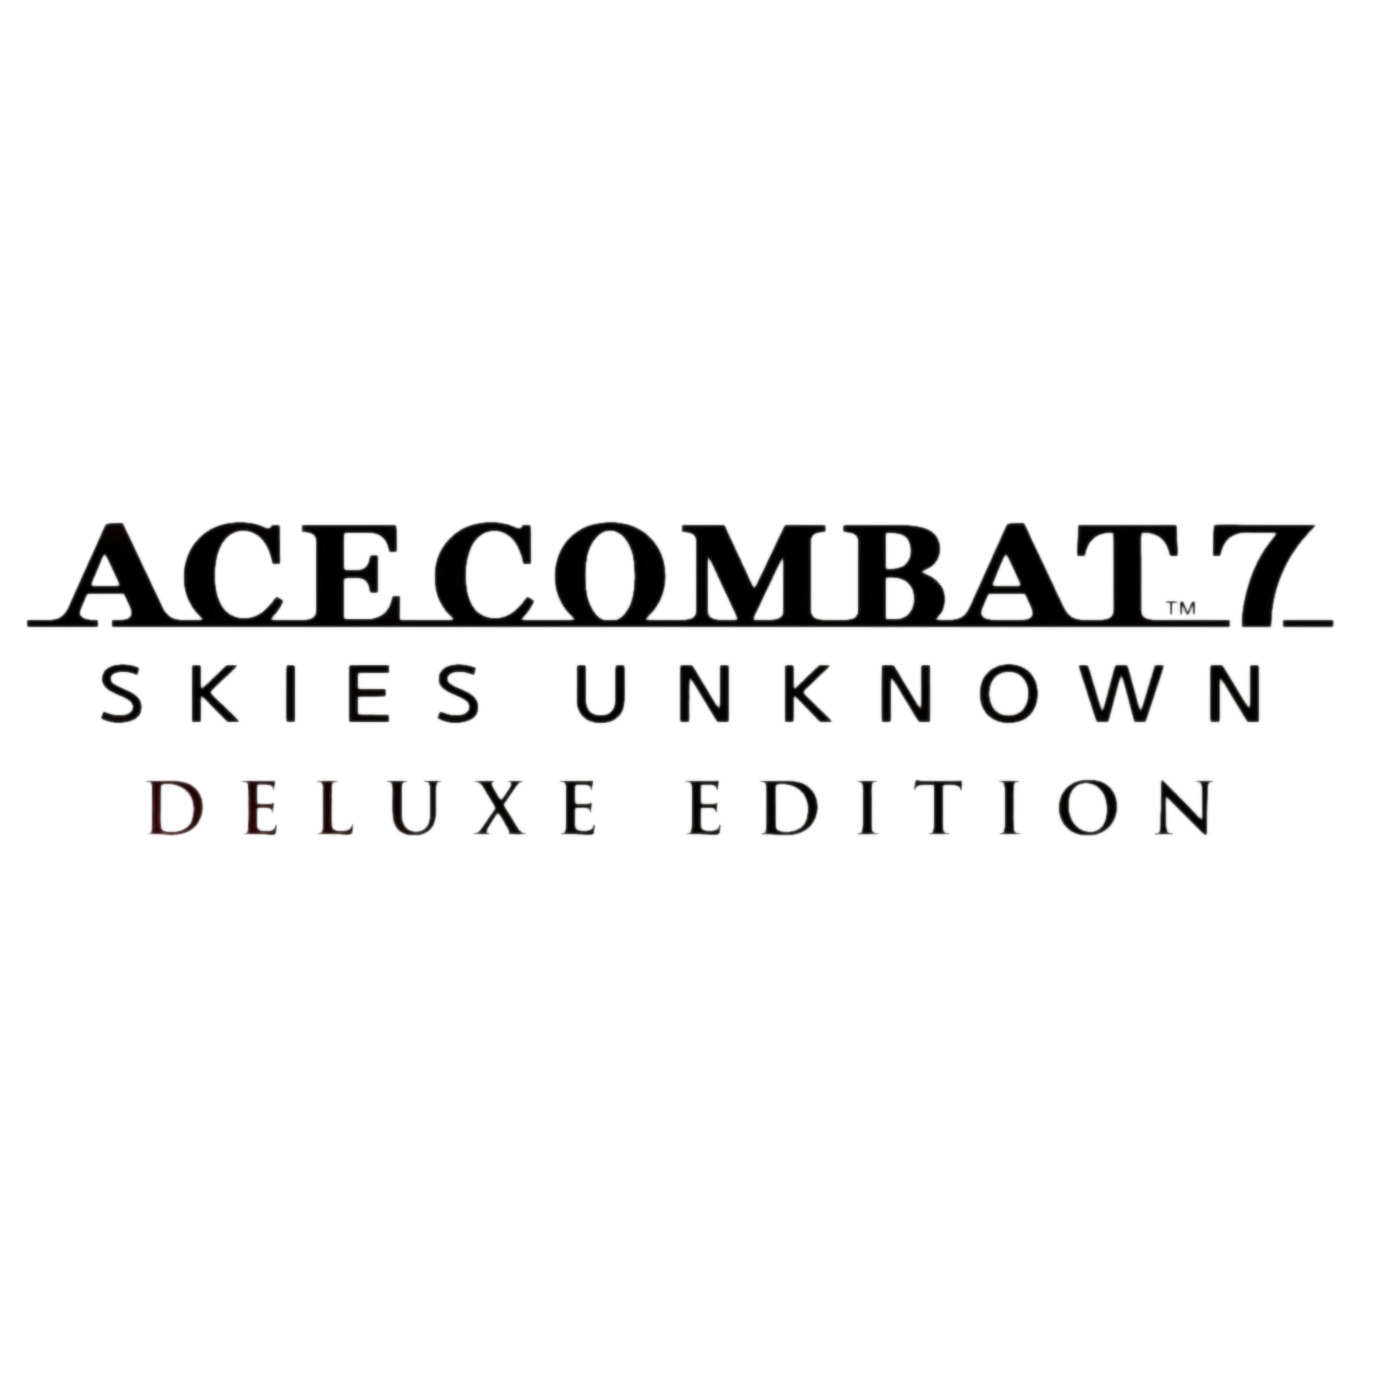 Ace Combat 7: Skies Unknown Deluxe Edition